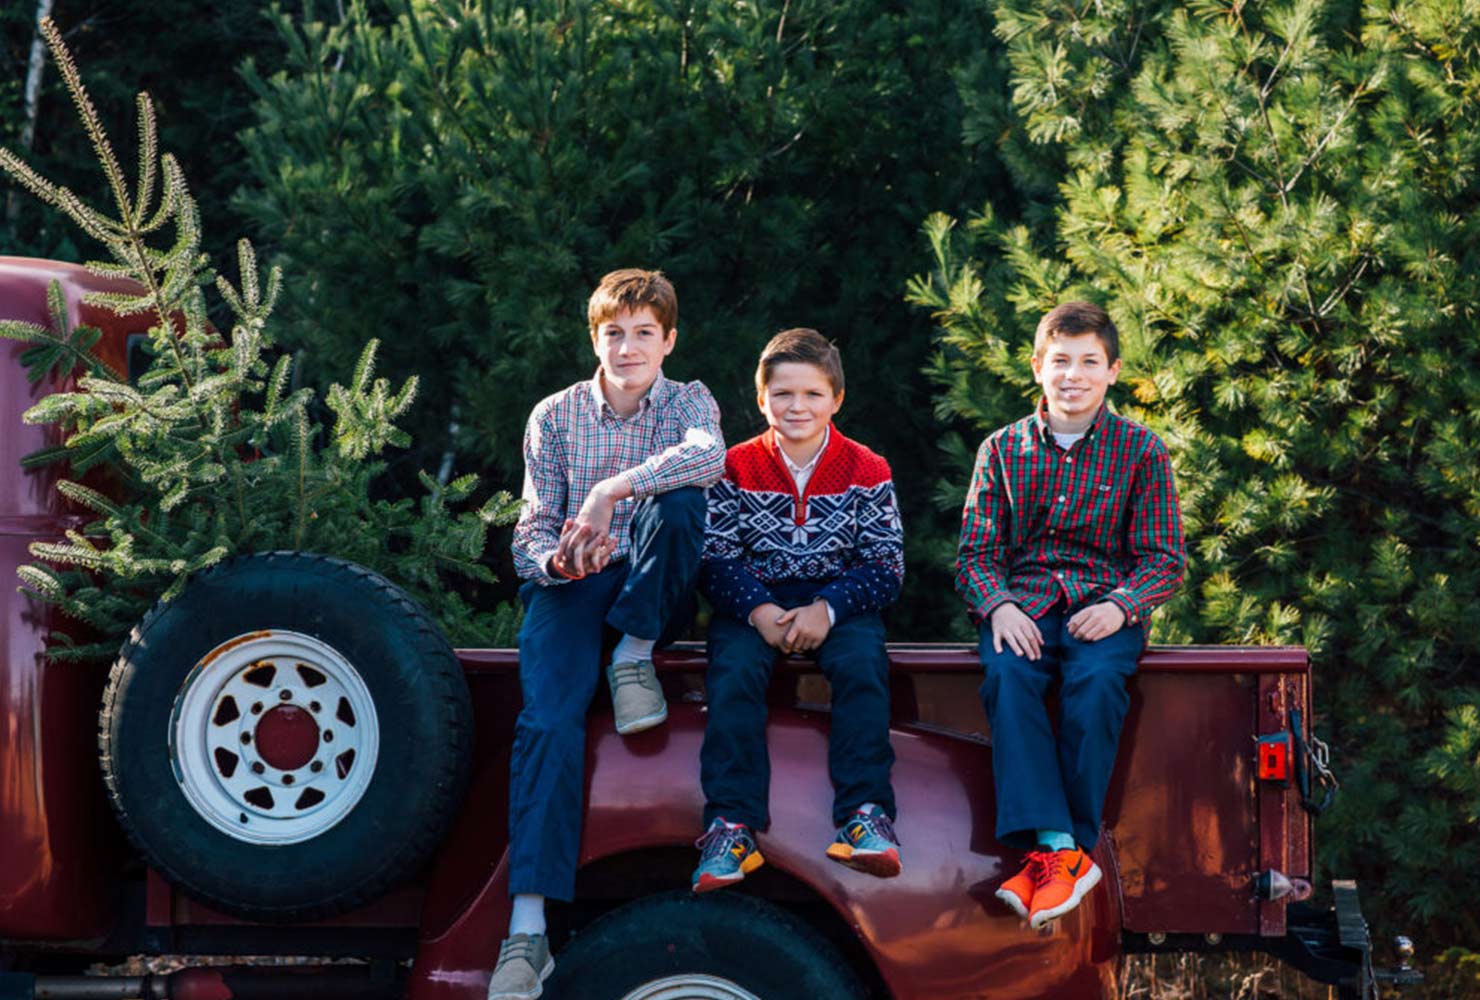 sibling photo ideas brothers truck bed